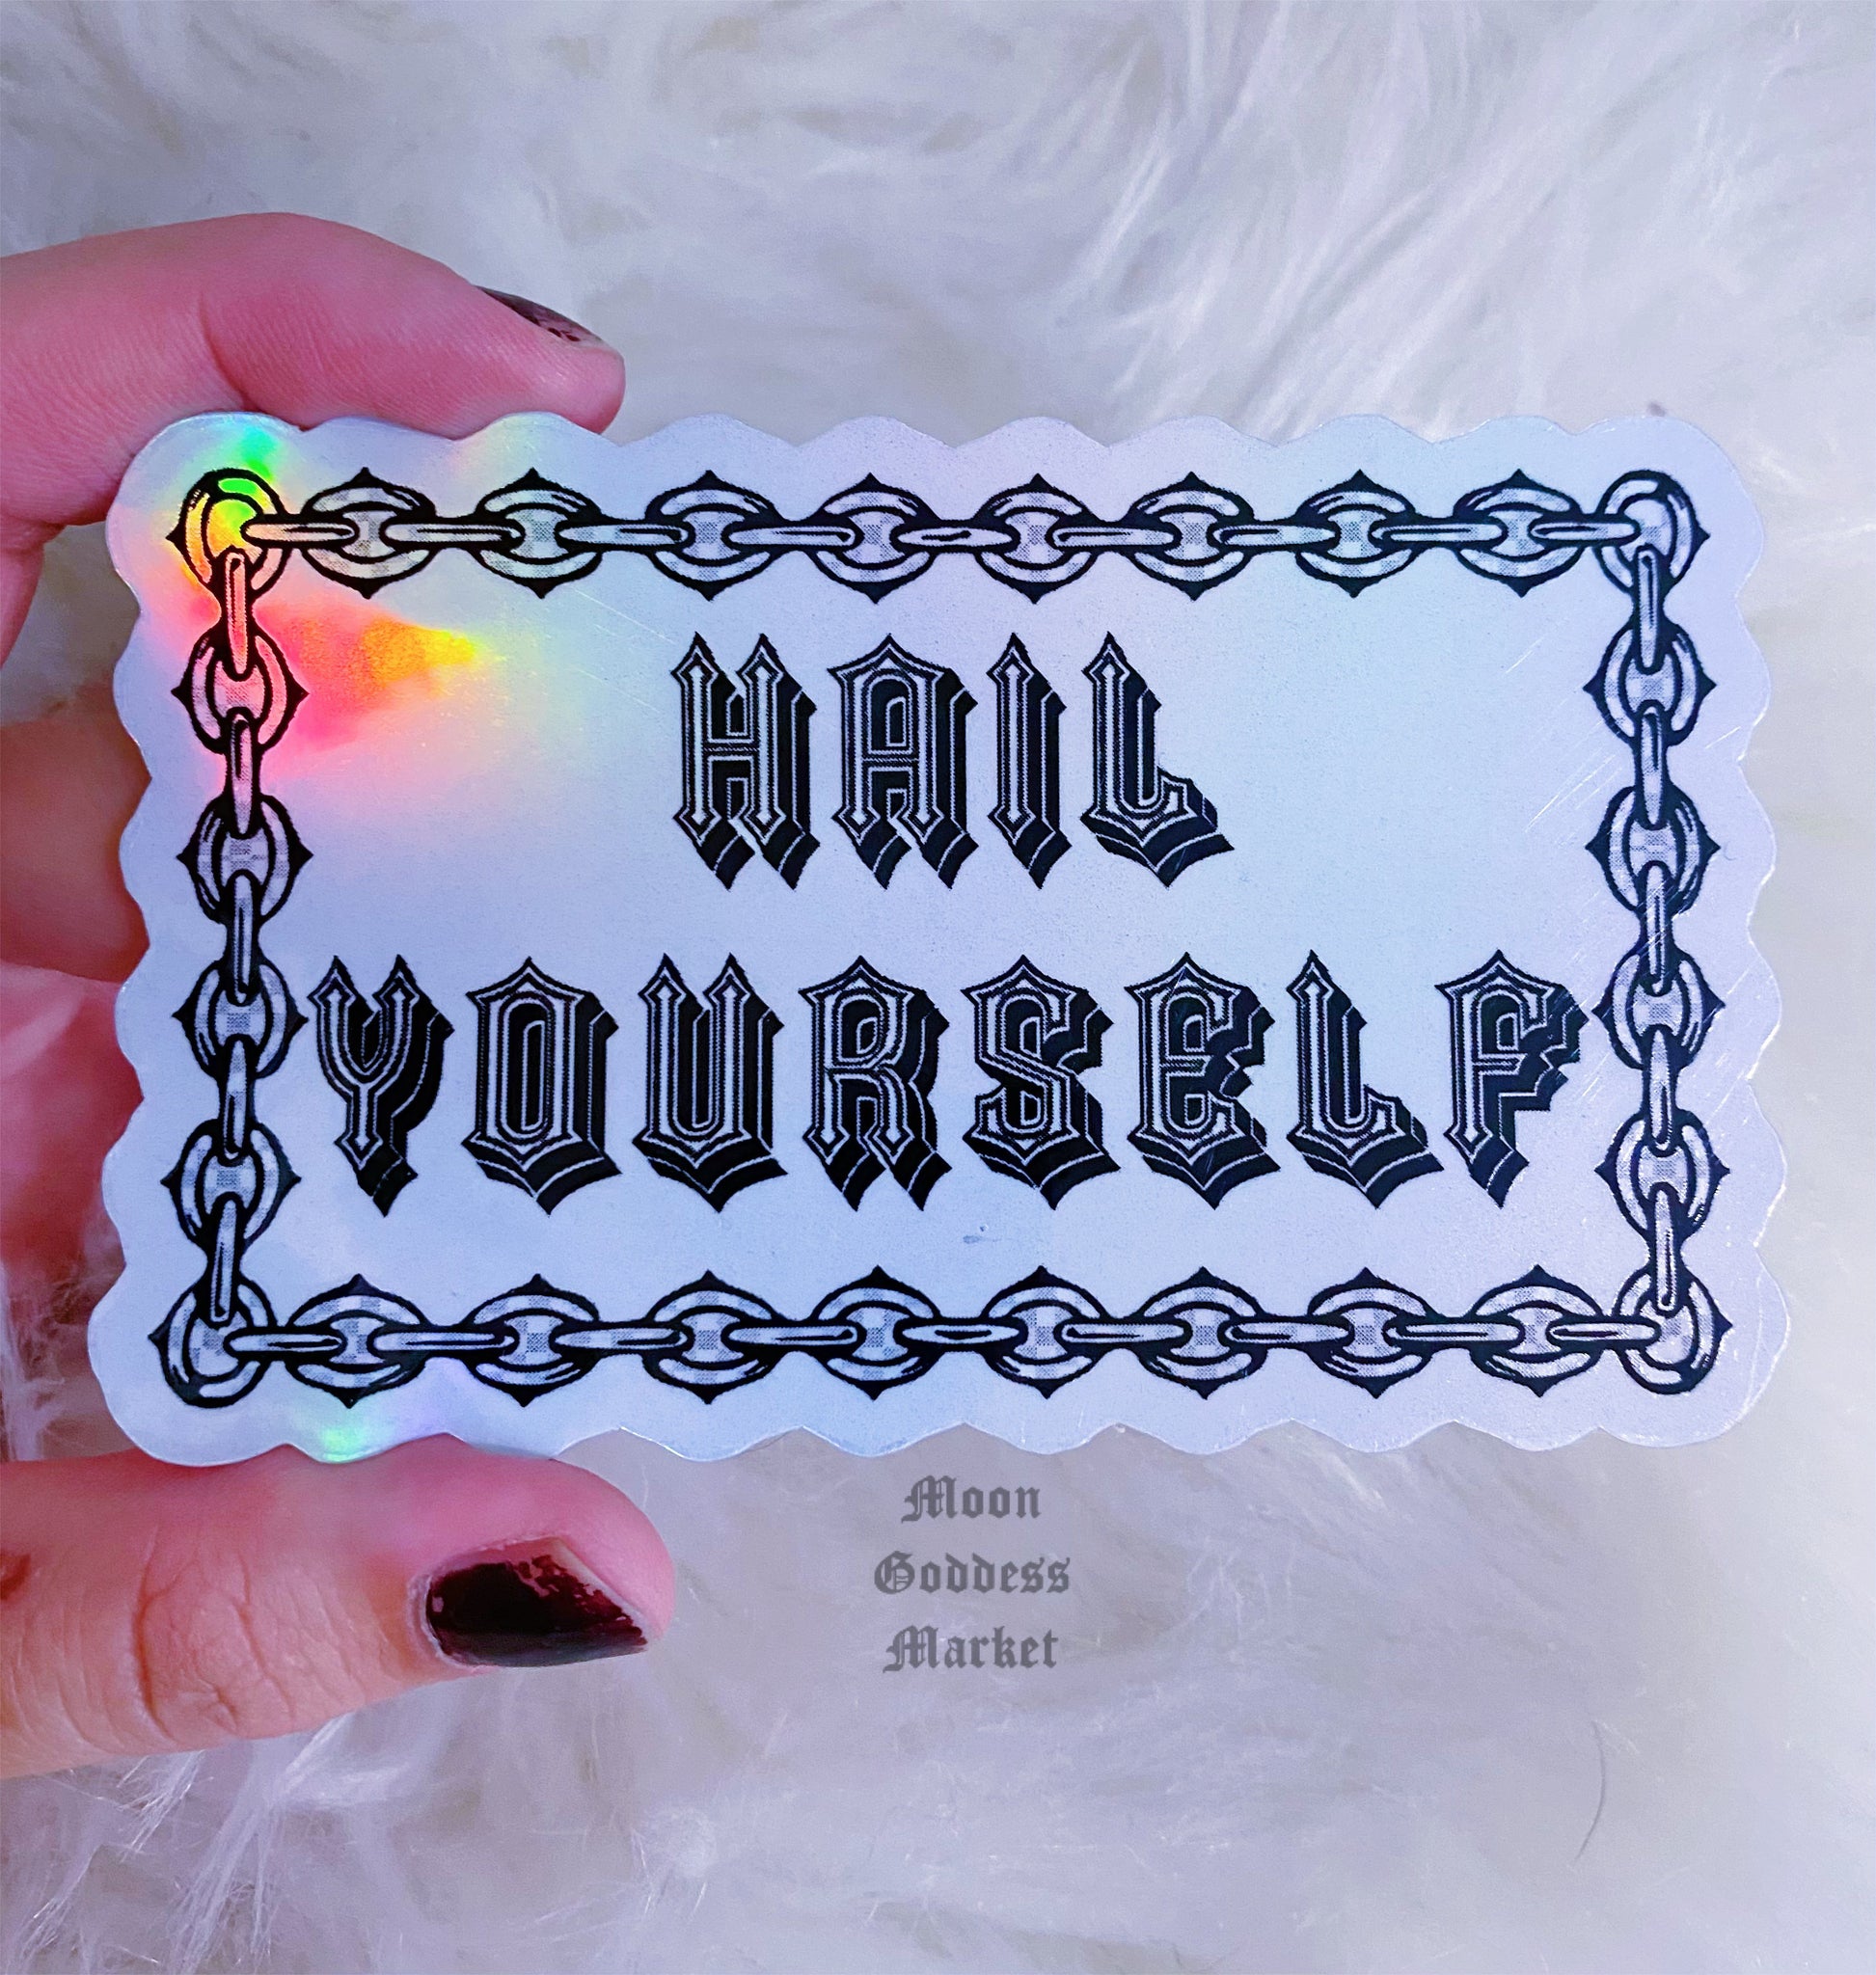 holographic stickers - Moon Goddess Market